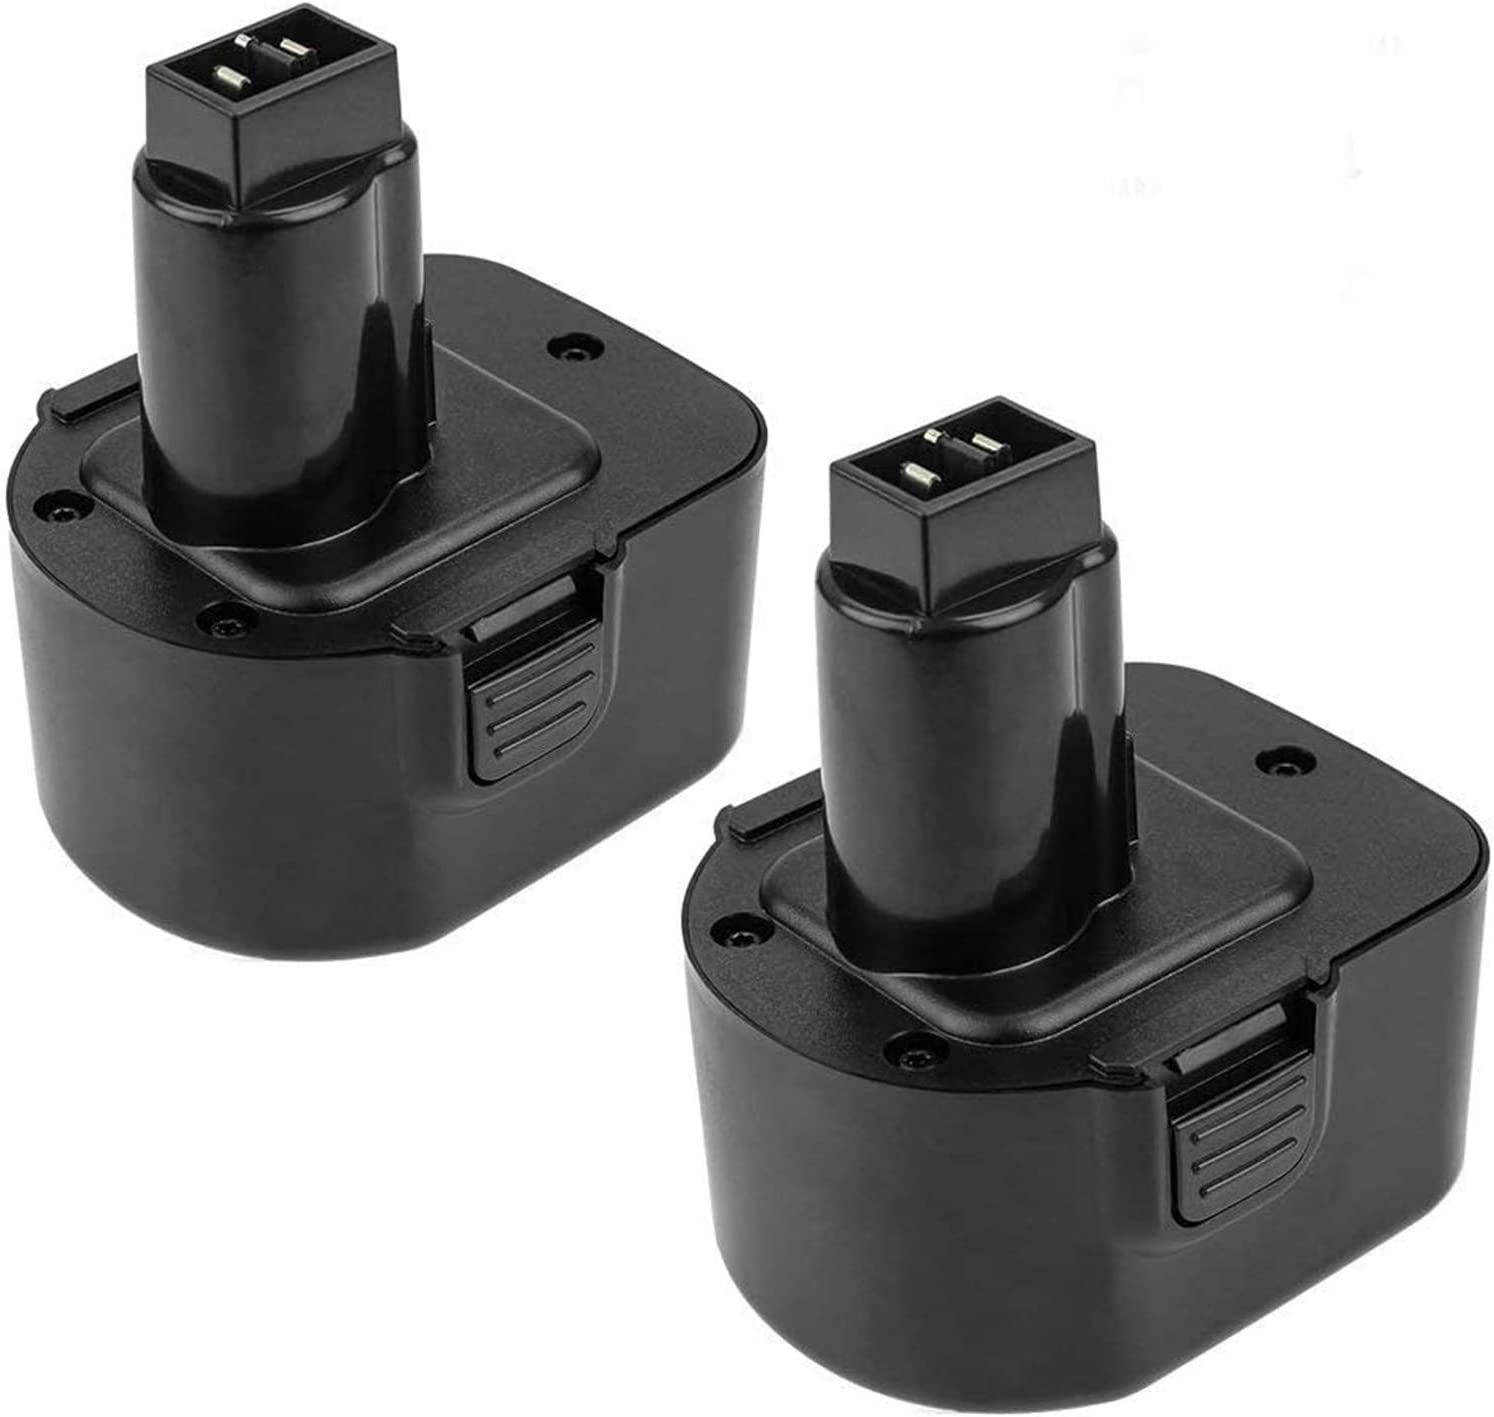 Powerextra 2.0Ah Black and Decker 40V Replacement Battery